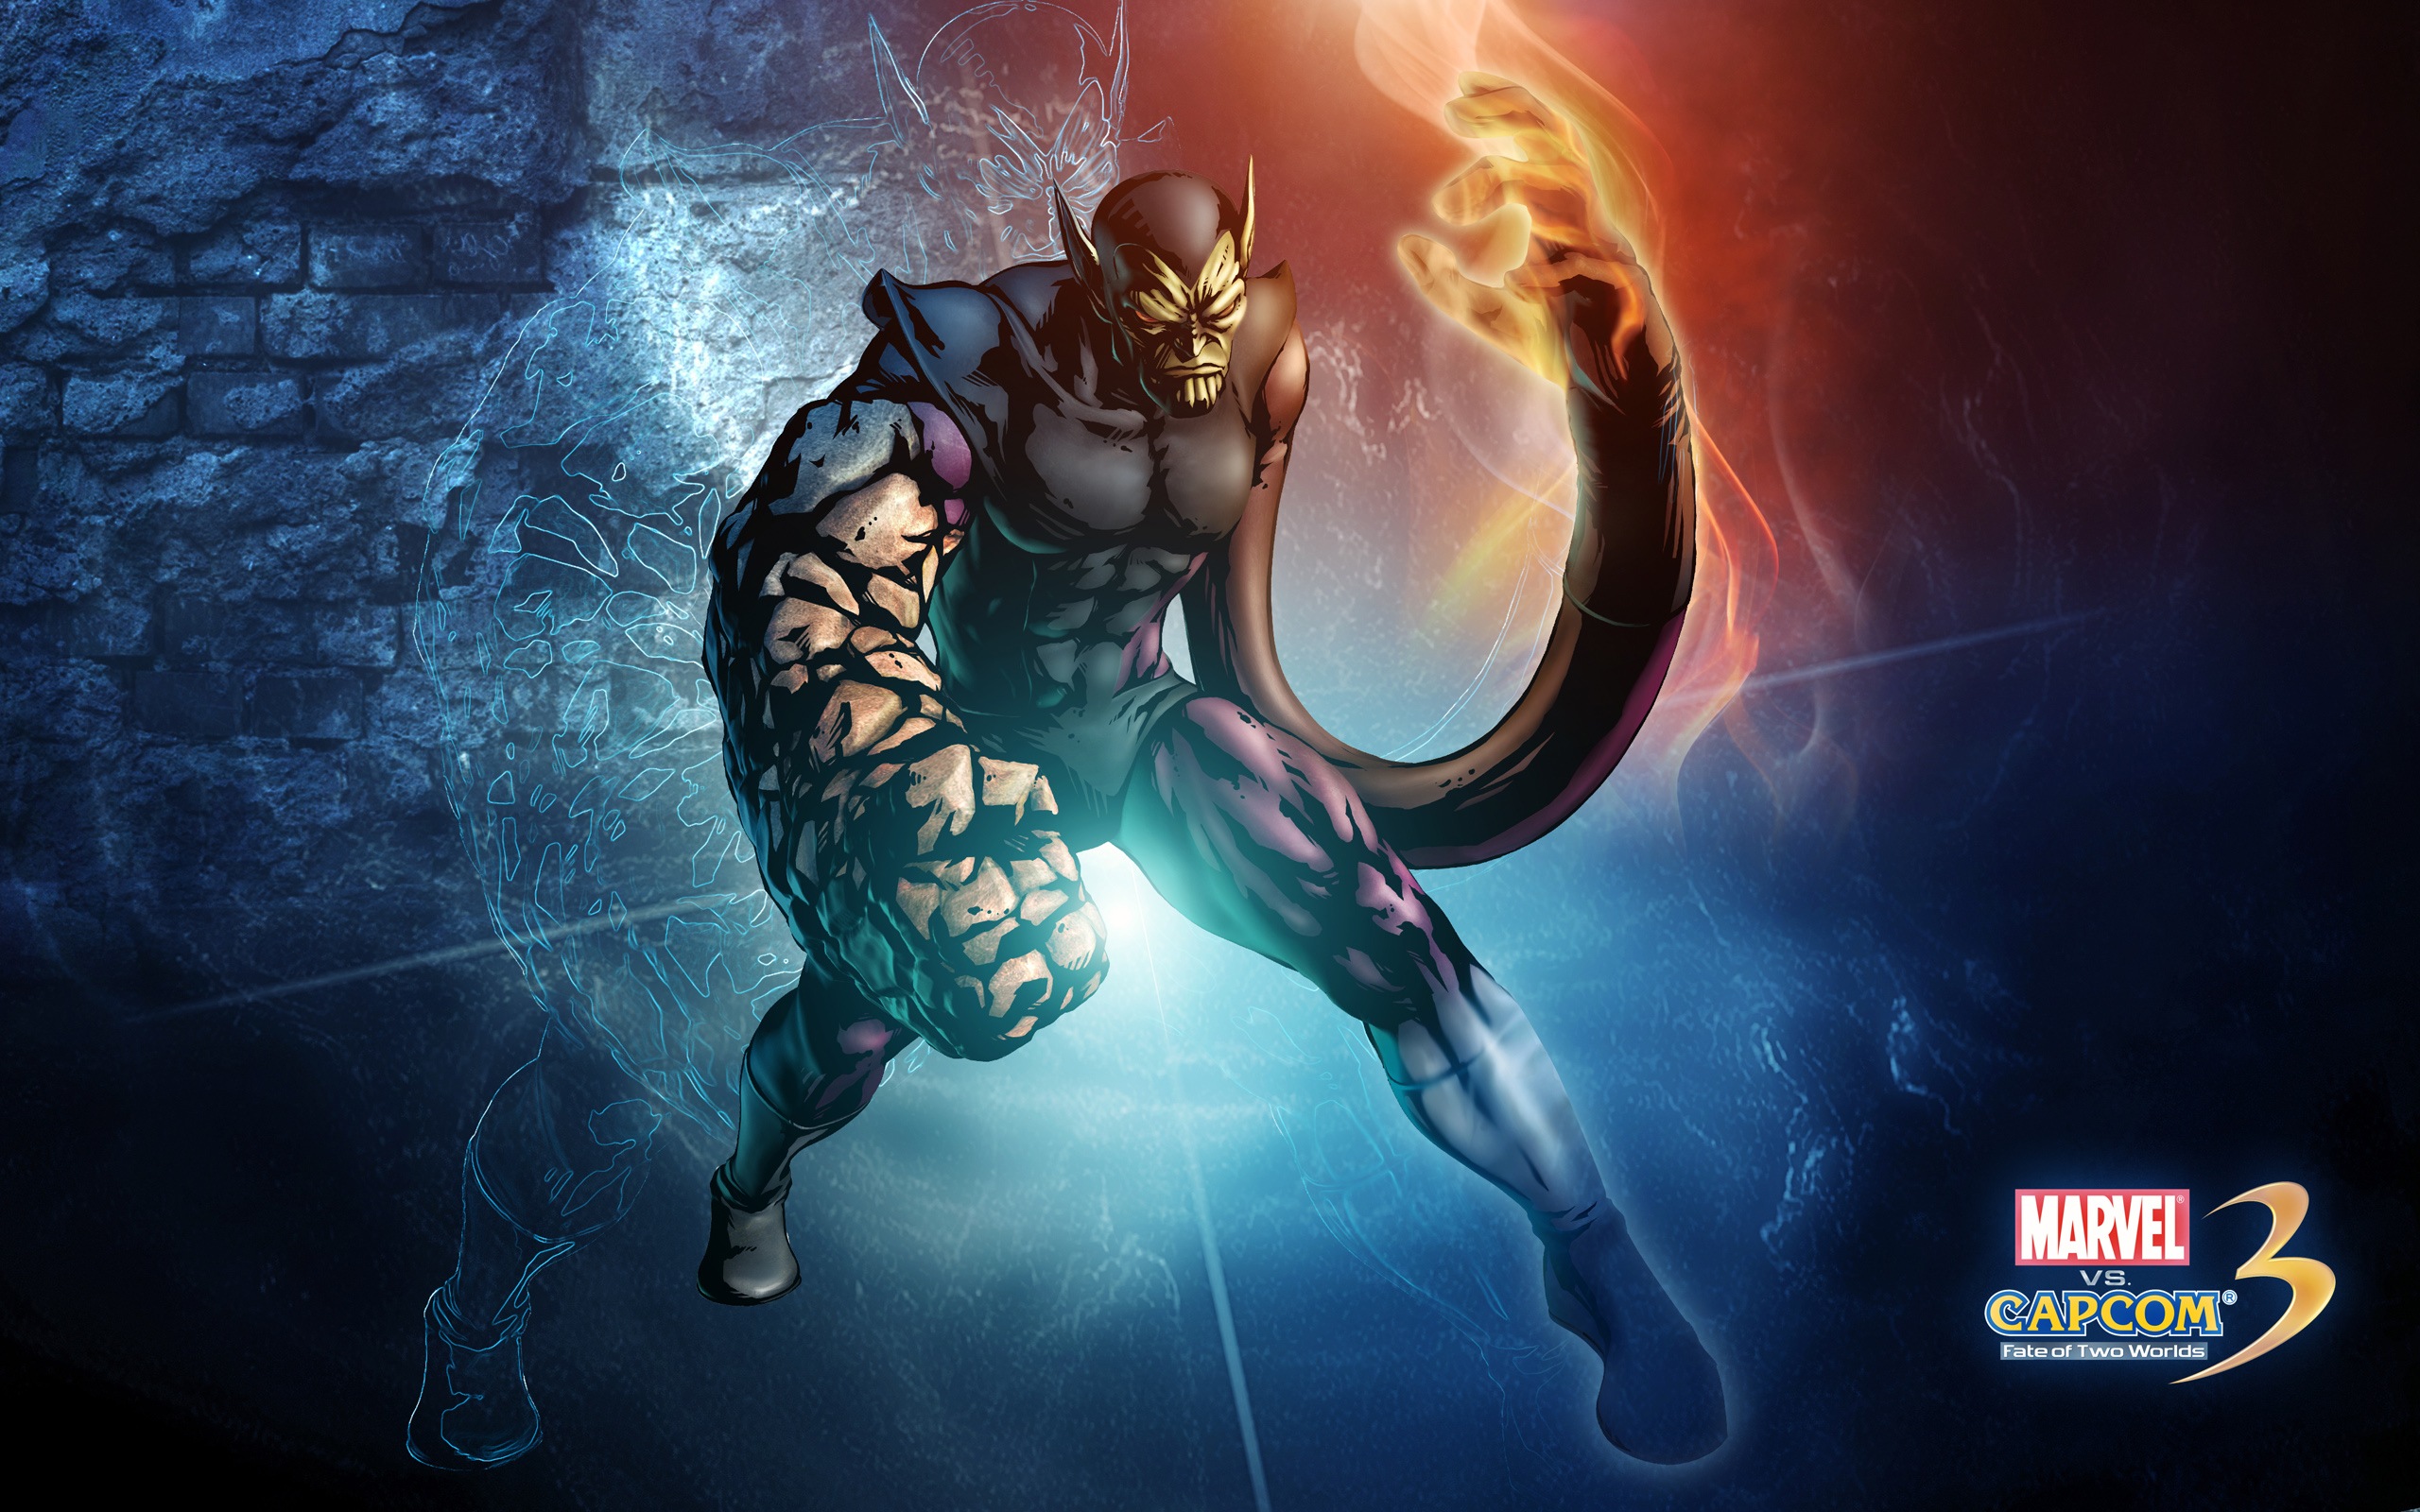 Marvel VS. Capcom 3: Fate of Two Worlds HD game wallpapers #24 - 2560x1600